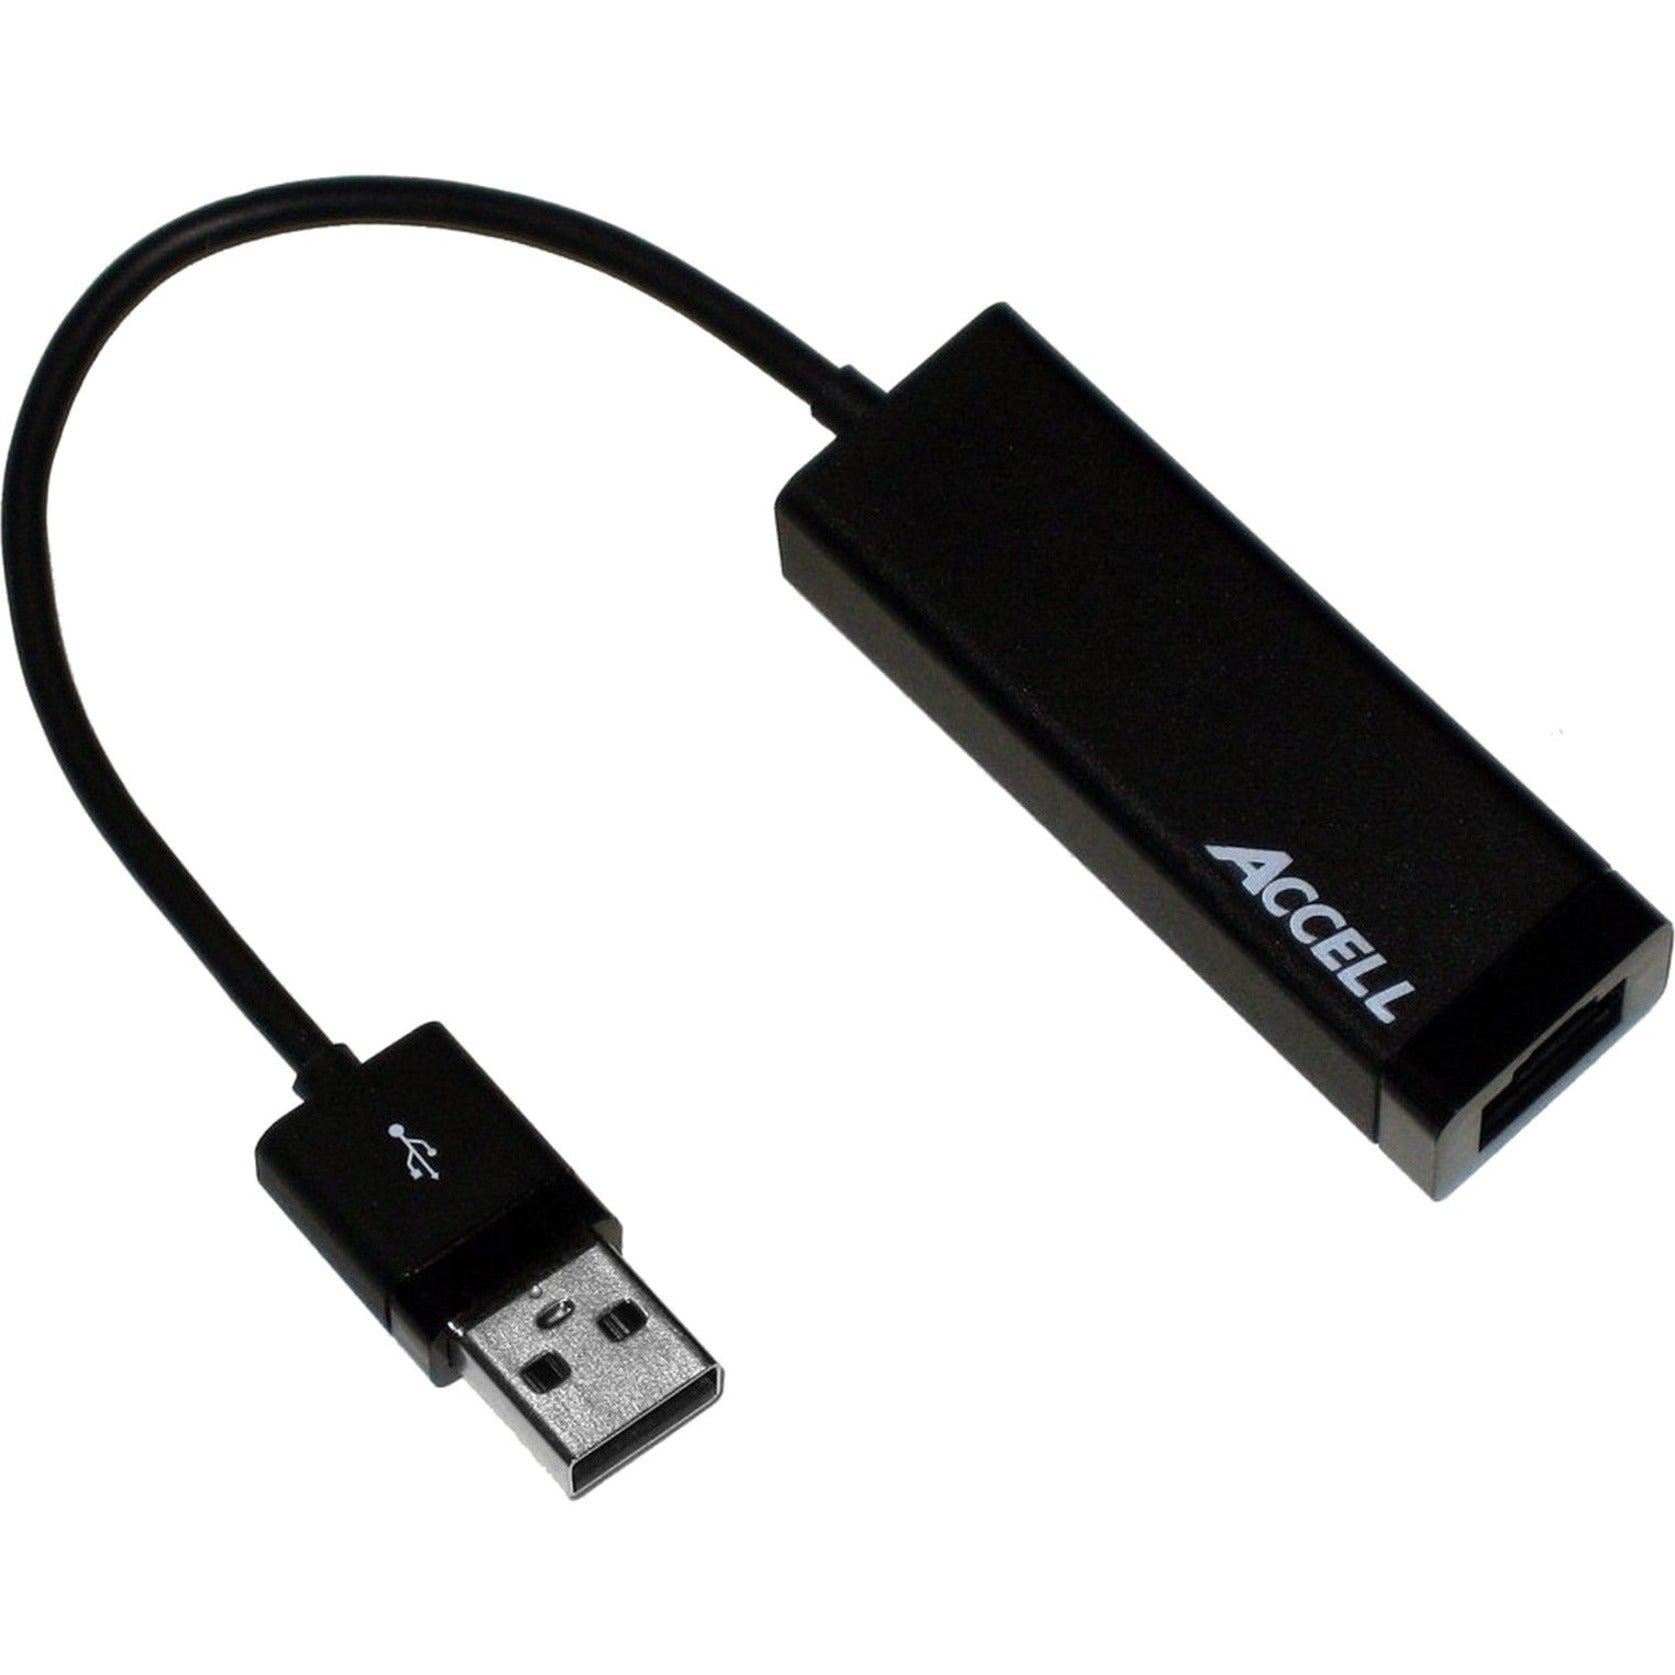 Accell J141B-005B-2 USB 3.0 to Gigabit Ethernet Adapter, High-Speed Internet Connection for Computers/Notebooks